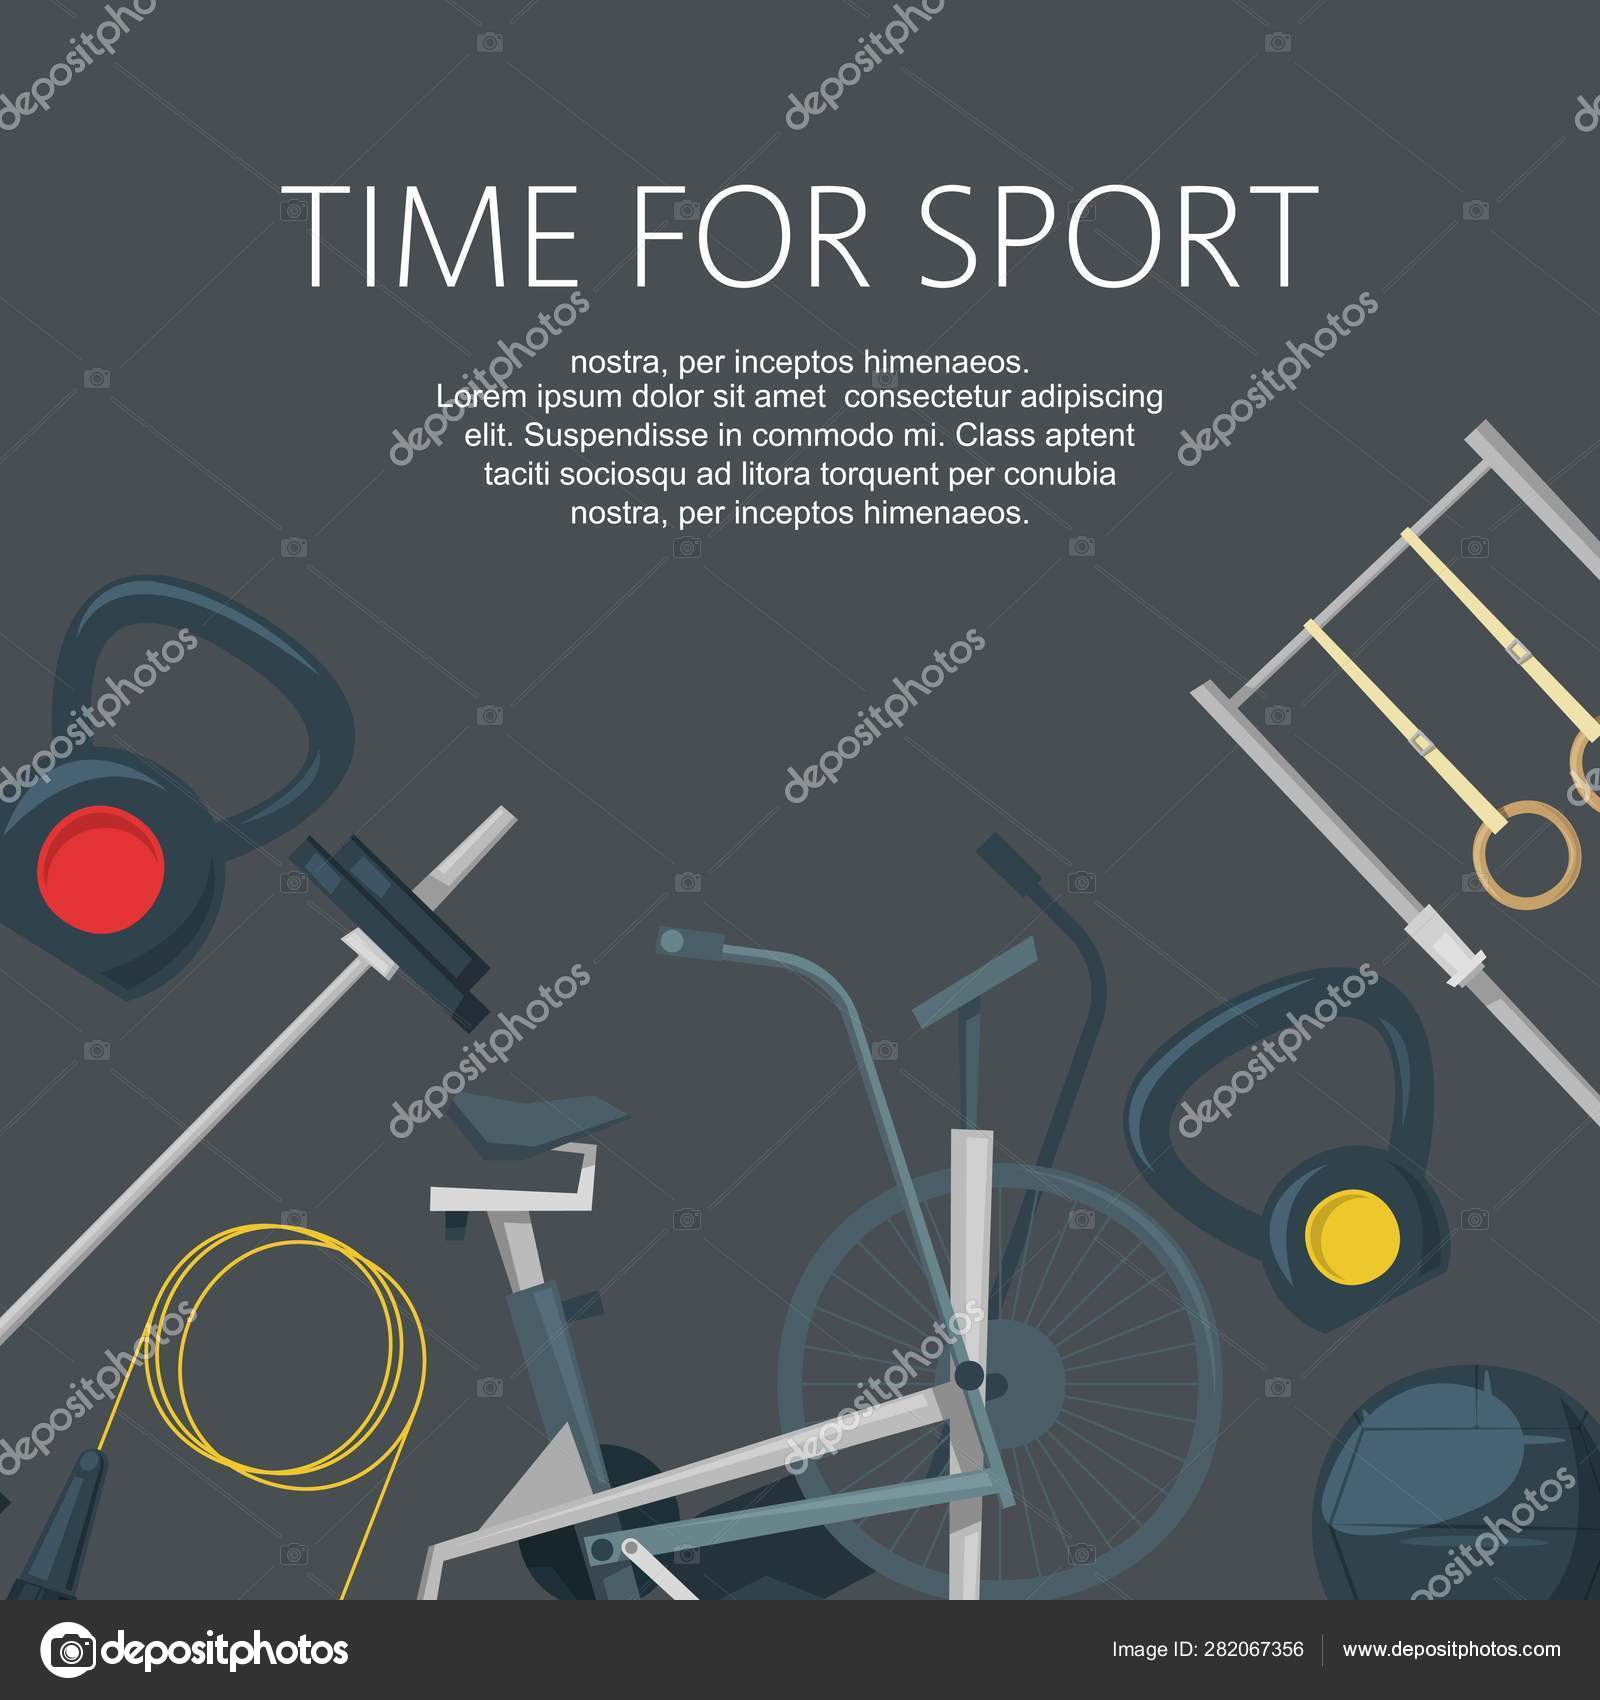 Time For Sport Fitness Workout In Club Or Center Background Banner Vector Illustration Gym With Crossfit Weights Equipment Fitness Machines For Bodybuilding And Exercises Stock Vector C Vectorshow